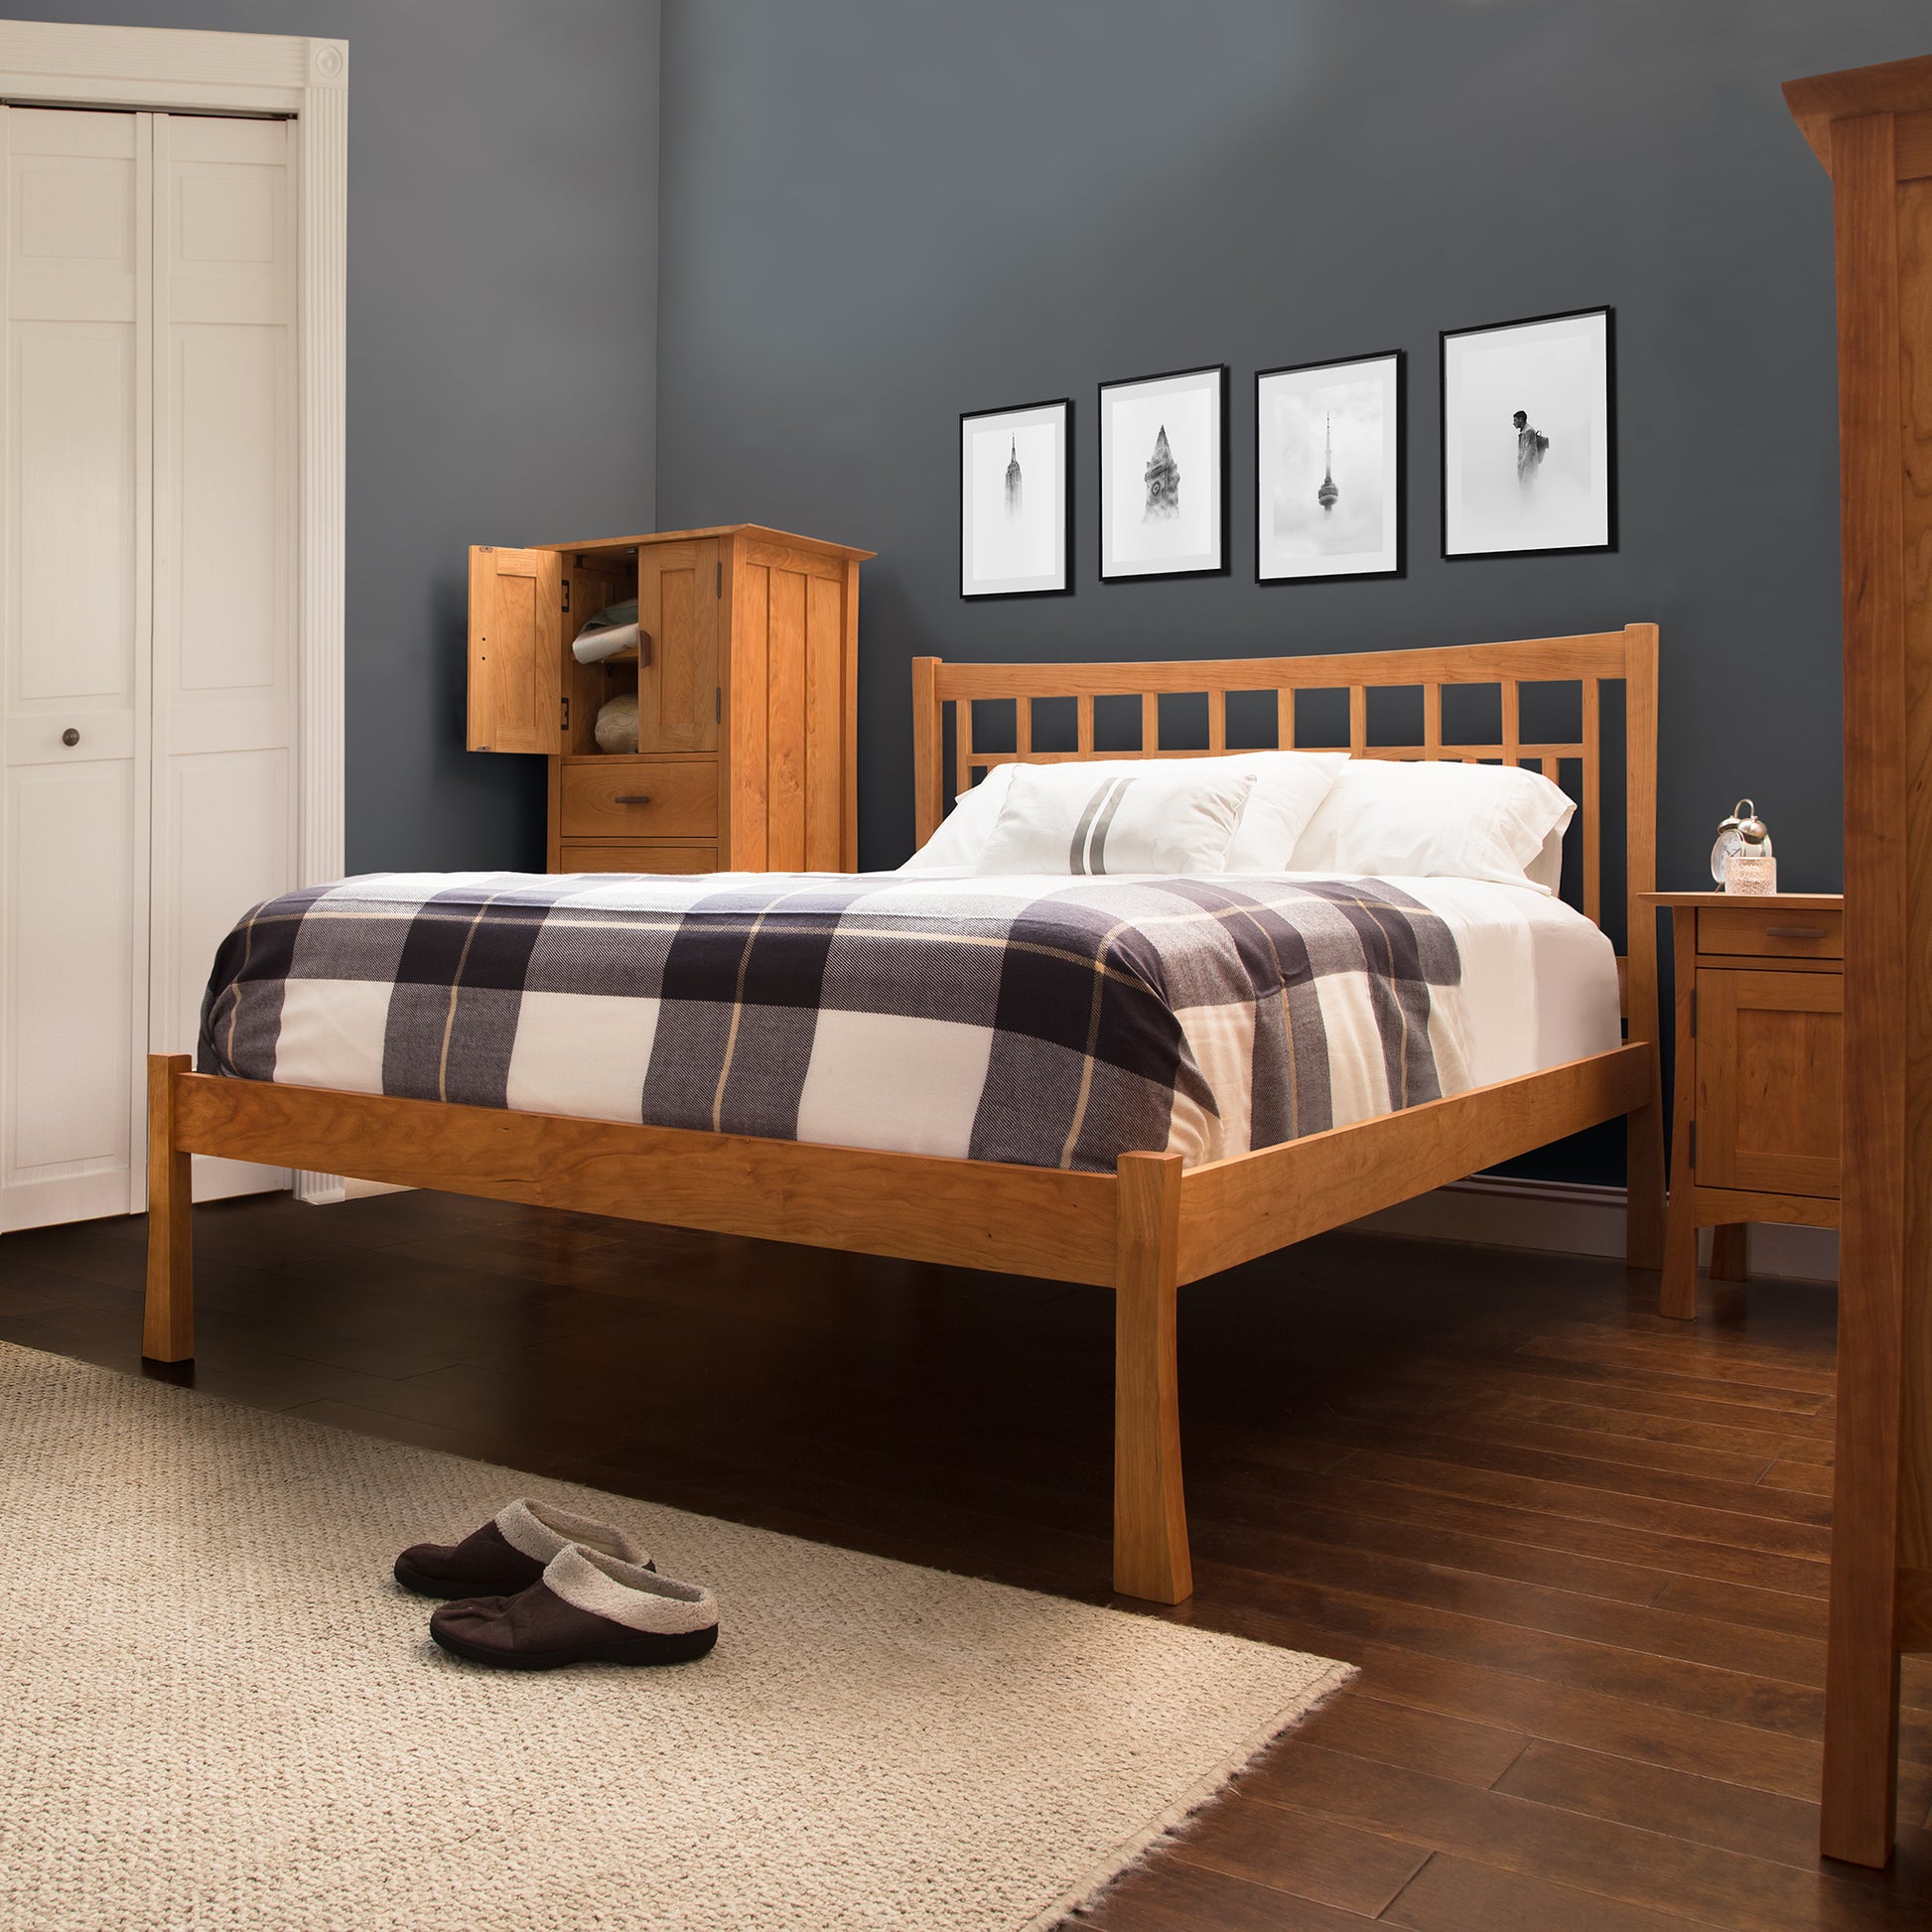 A neatly made bed with a checkered patterned comforter in a bedroom with dark blue walls and a Contemporary Craftsman Low Footboard Bed by Vermont Furniture Designs, accompanied by matching wooden furniture and wall art above the bed.